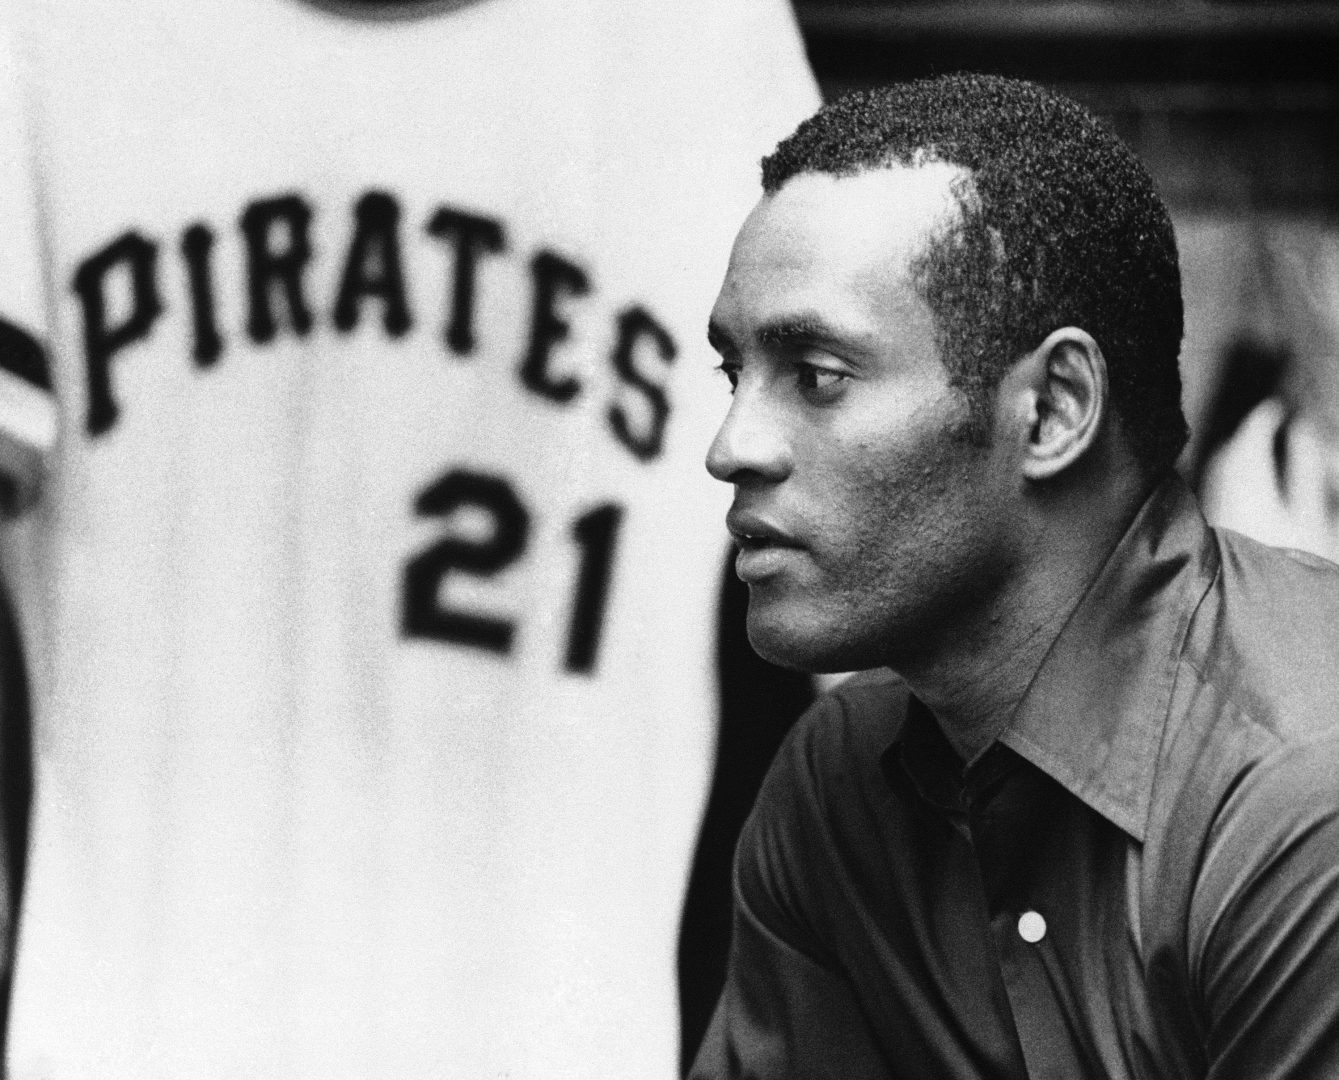 Pirates to wear No. 21 on Sept. 9 to honor Roberto Clemente